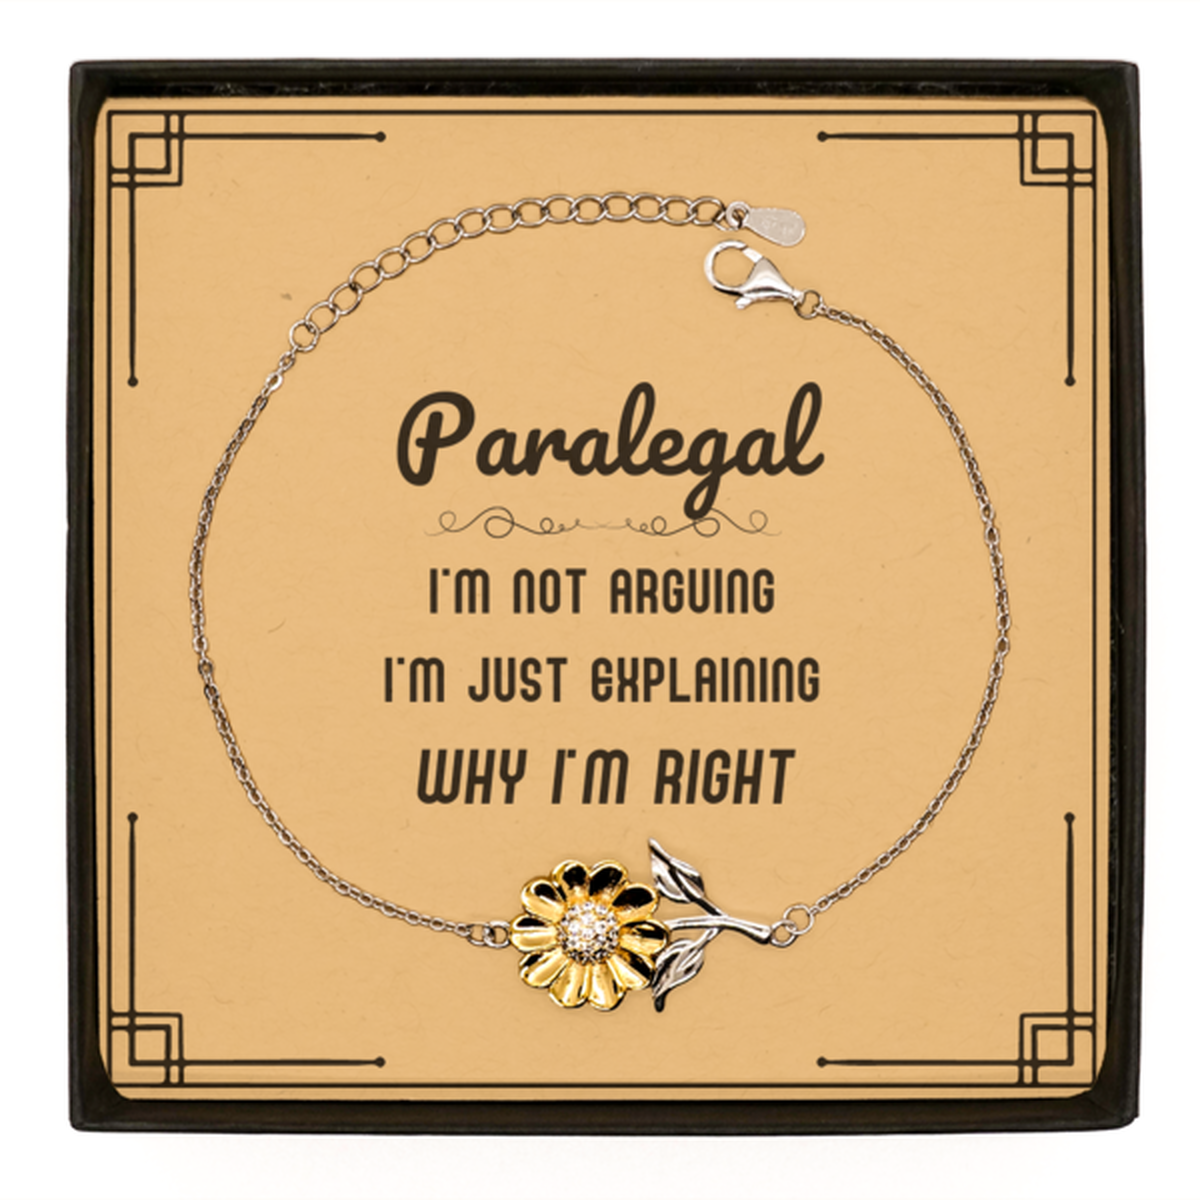 Paralegal I'm not Arguing. I'm Just Explaining Why I'm RIGHT Sunflower Bracelet, Funny Saying Quote Paralegal Gifts For Paralegal Message Card Graduation Birthday Christmas Gifts for Men Women Coworker